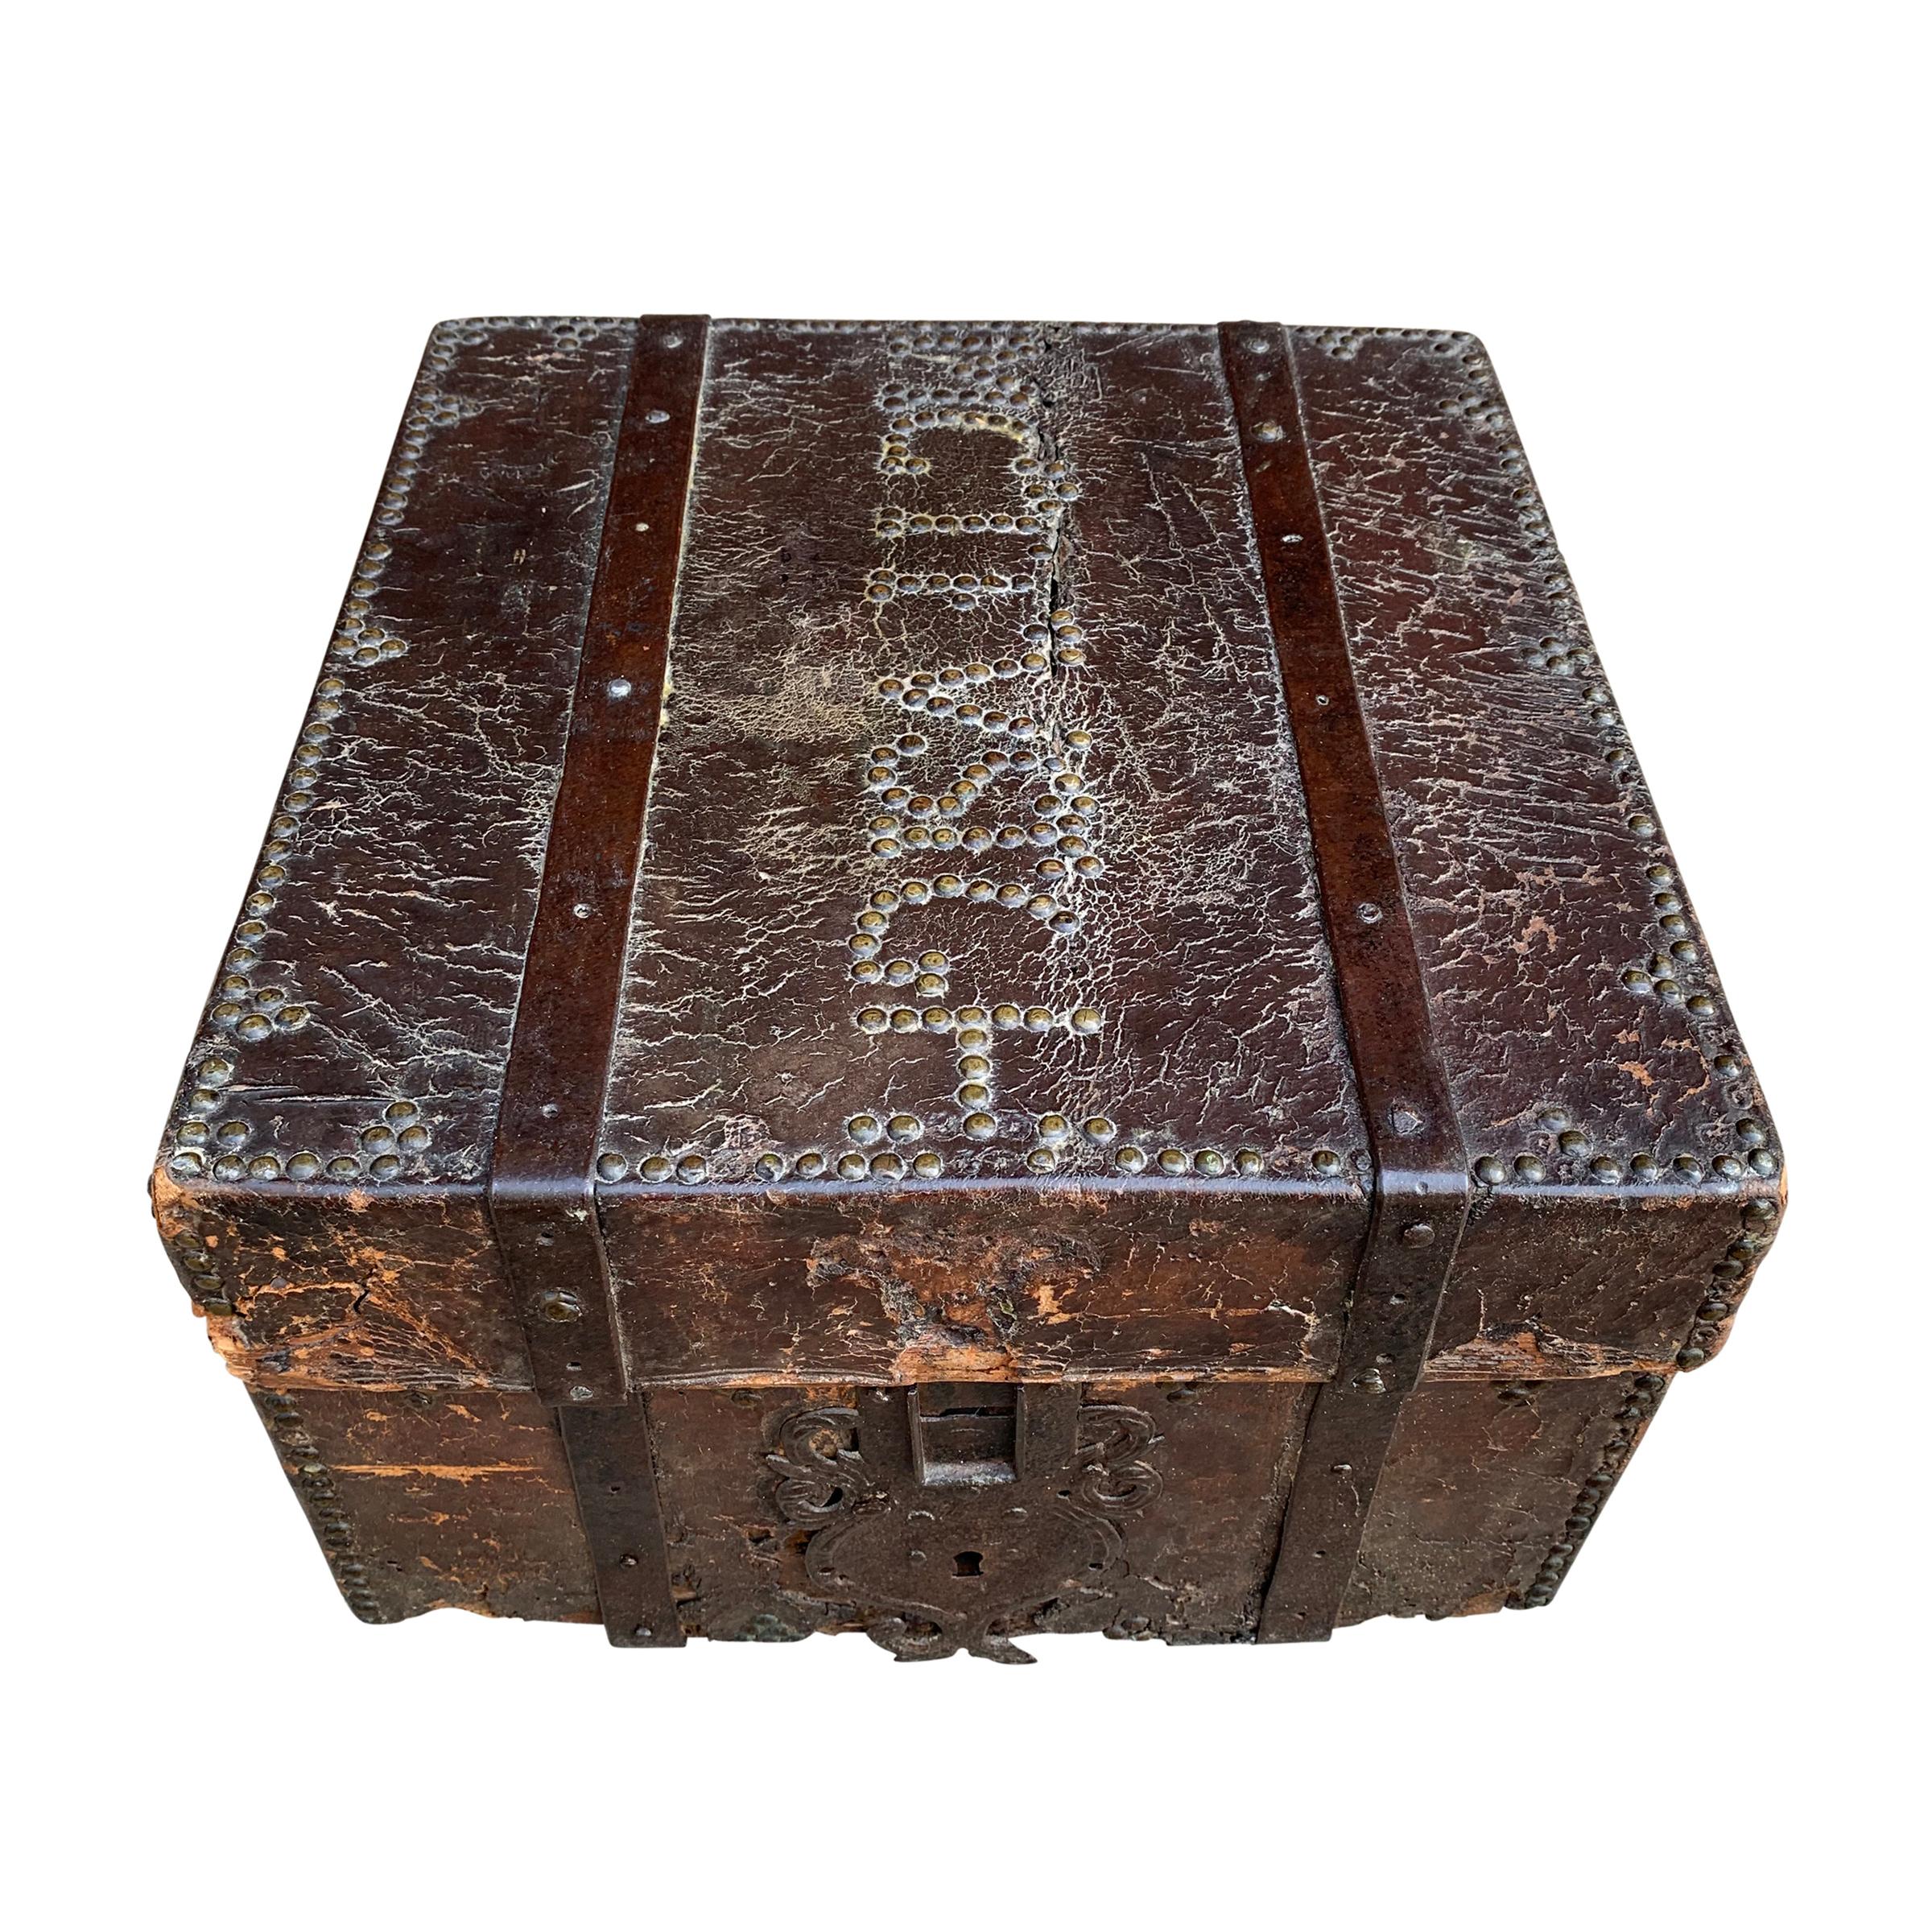 A stunning 17th century Italian leather covered wood trunk covered in brass nail heads, some spelling out a word on top, and with iron strap hinges and handles, and with a divided interior with a striped hand-painted paper liner.